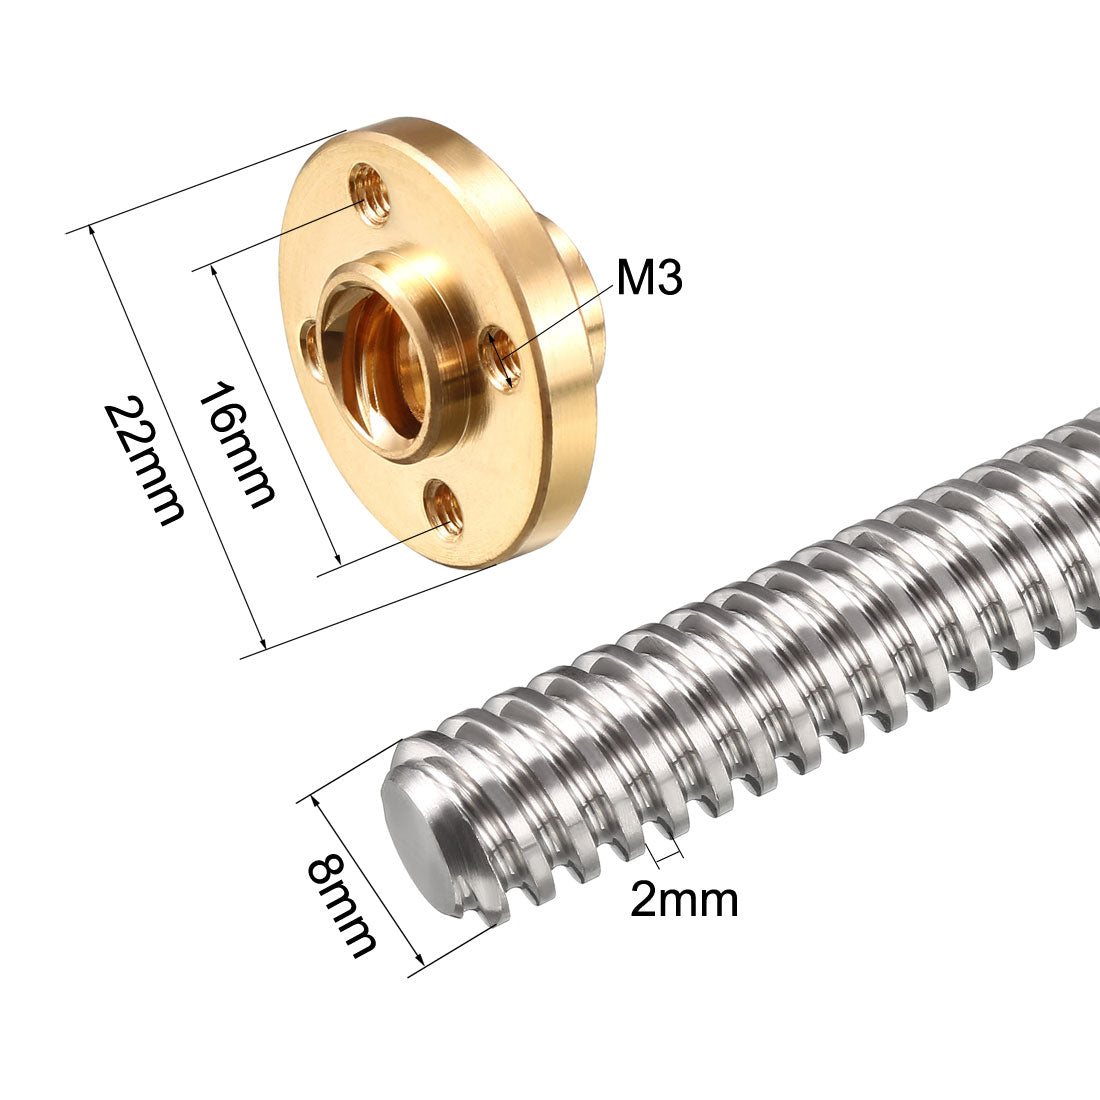 uxcell Uxcell 550mm T8 Pitch 2mm Lead 4mm Lead Screw Rod with Copper Nut for 3D Printer